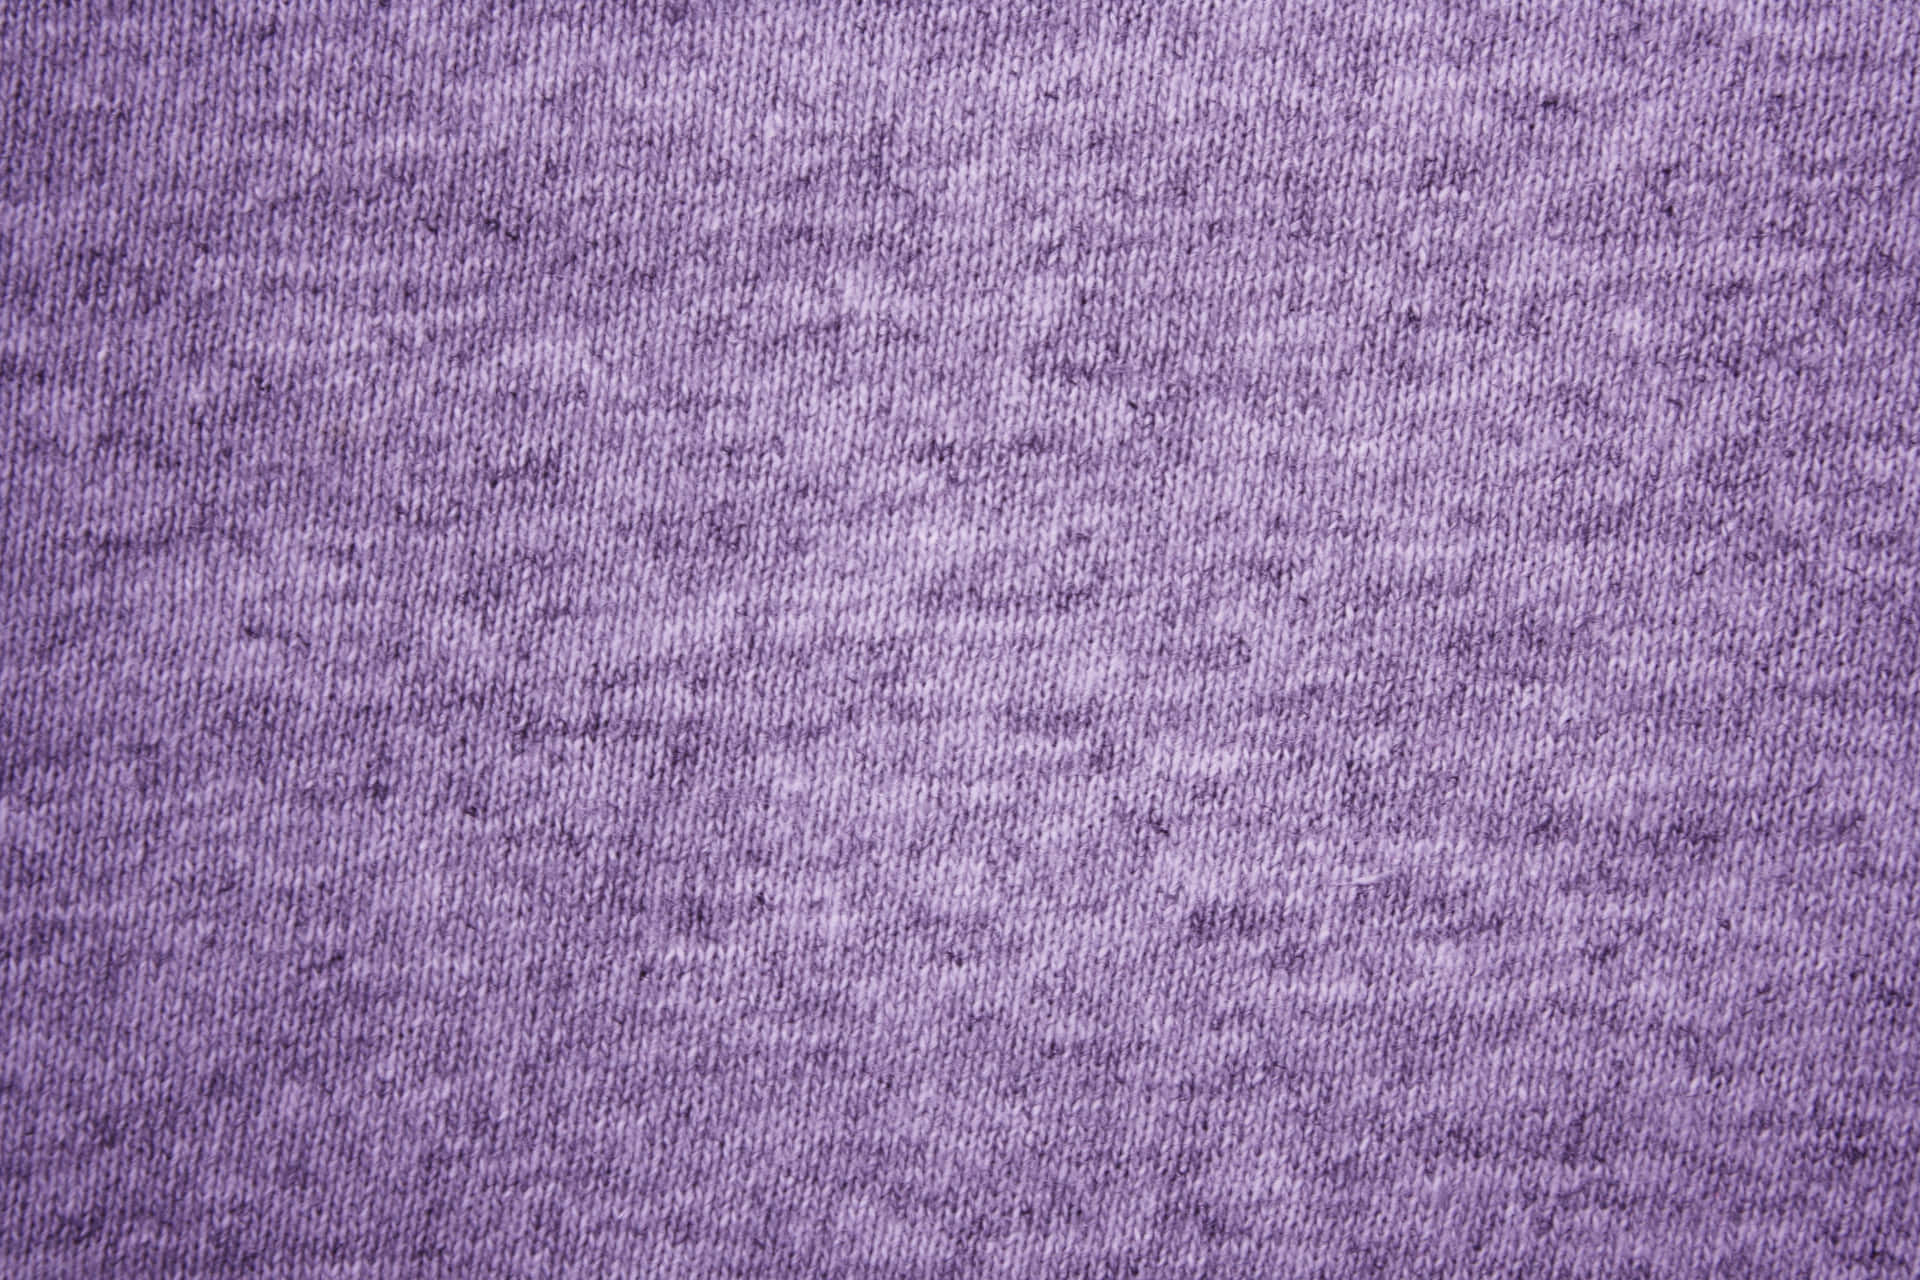 Fabric Texture Pictures Heather Purple Wool Knitted